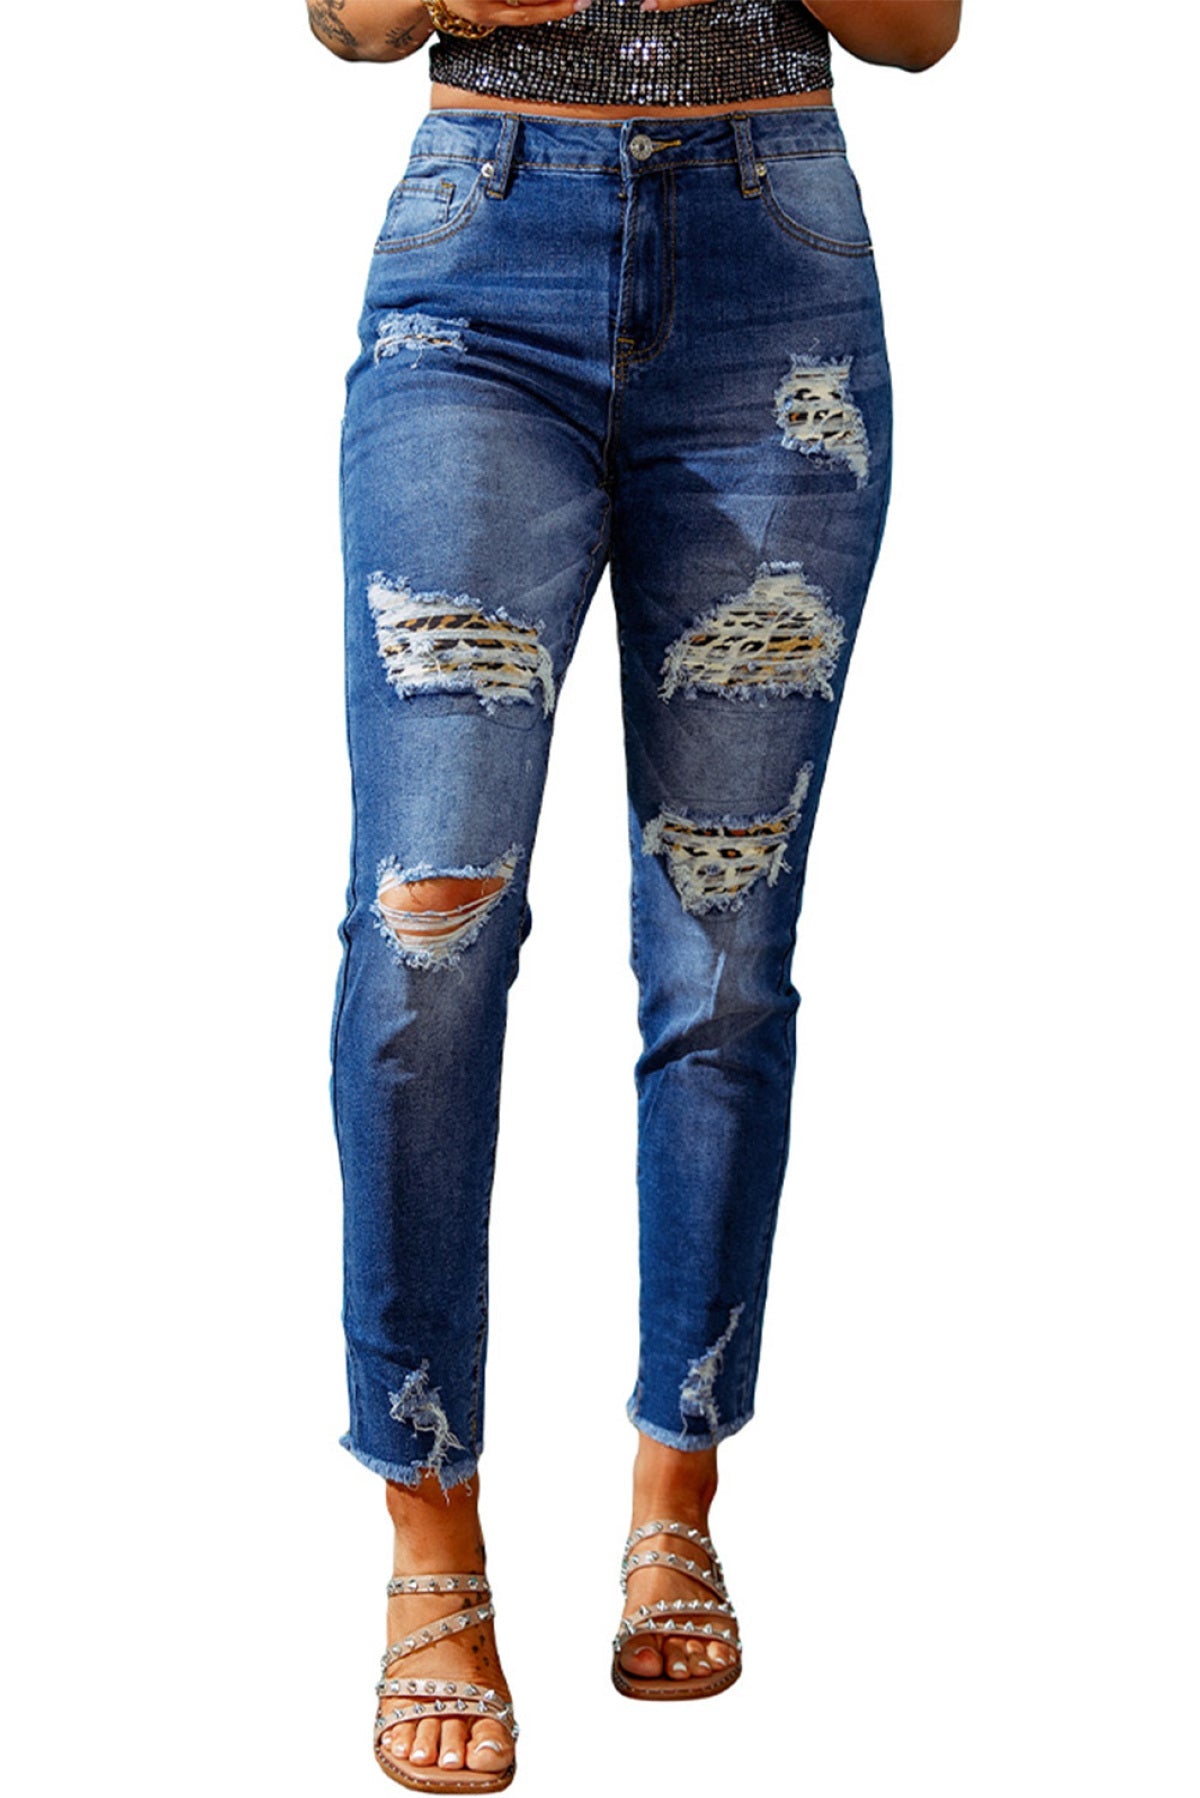 Dark Blue Washed Skinny Jeans With Distressed Leopard Print